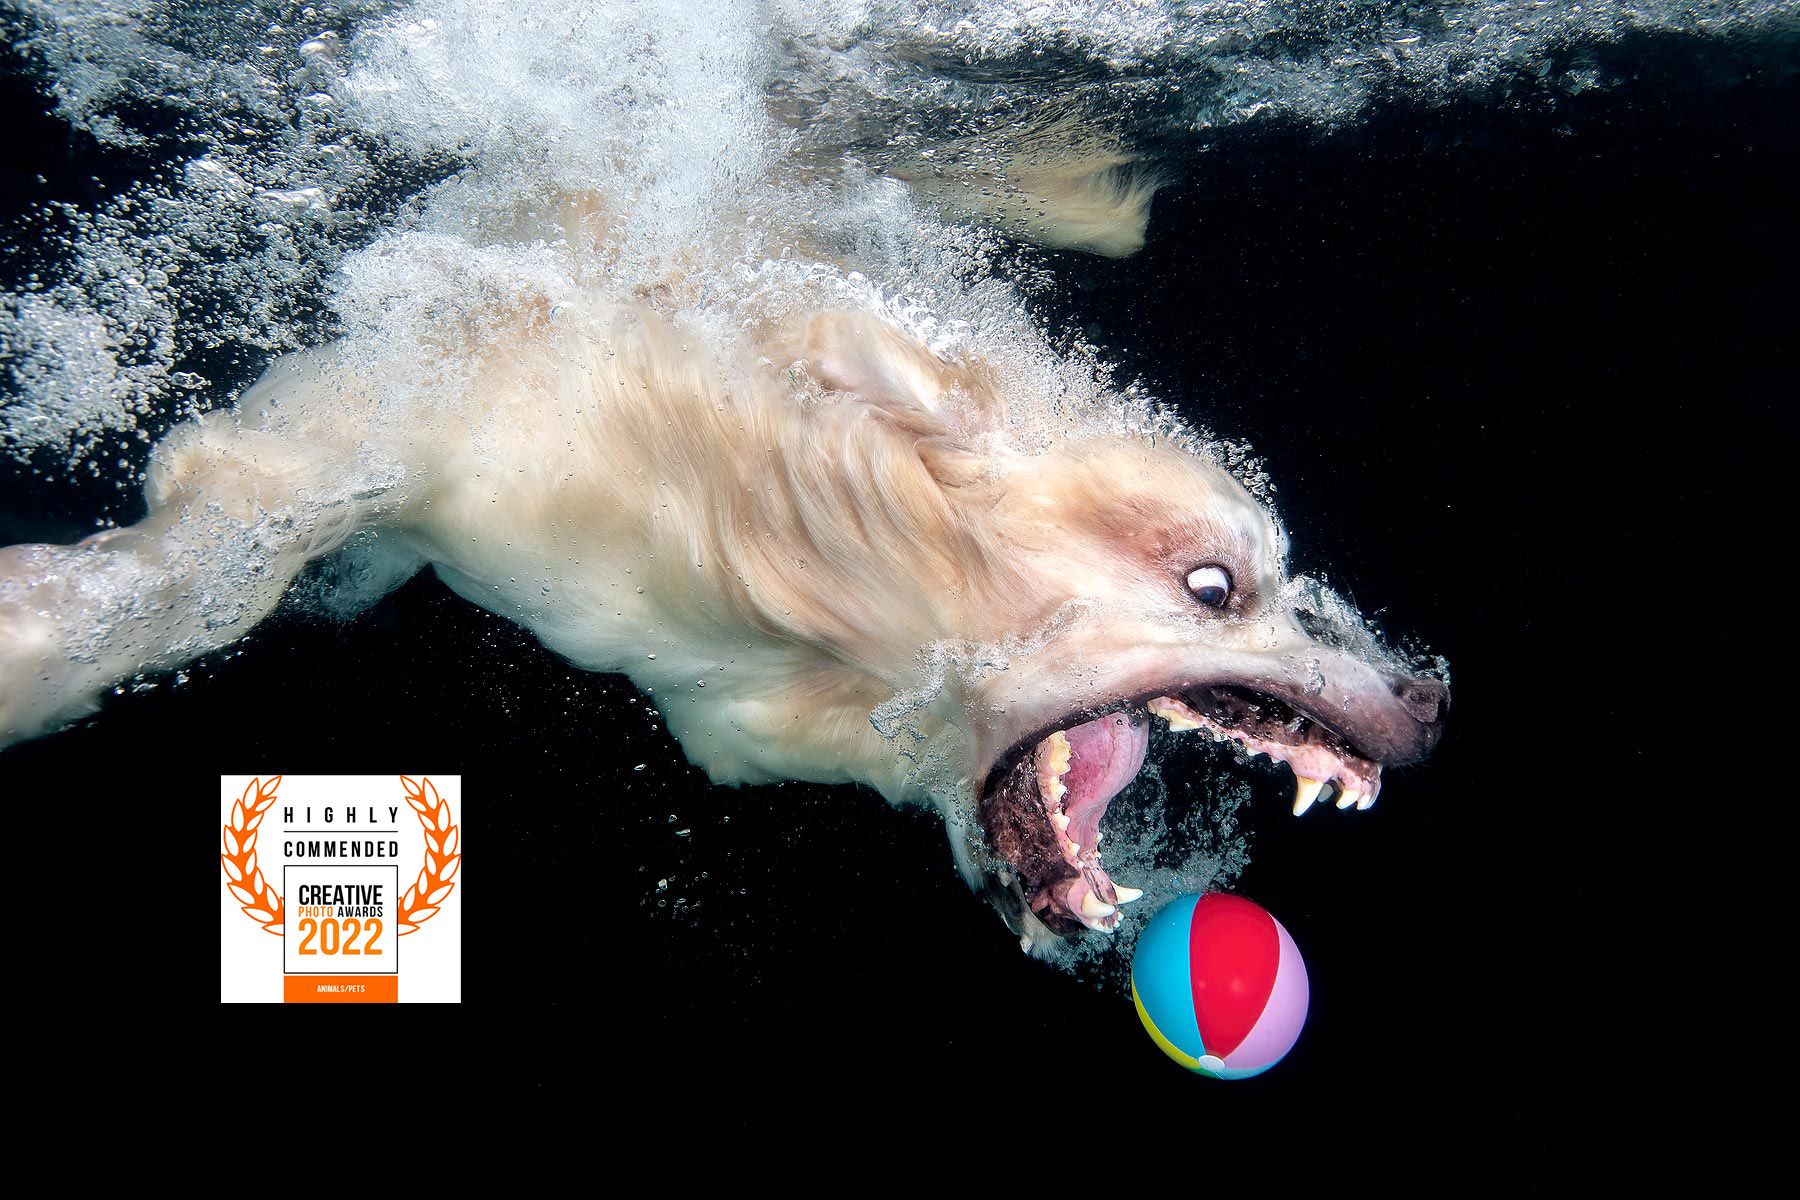 Clemens Vanderwerf_Golden retriever diving after colorful ball